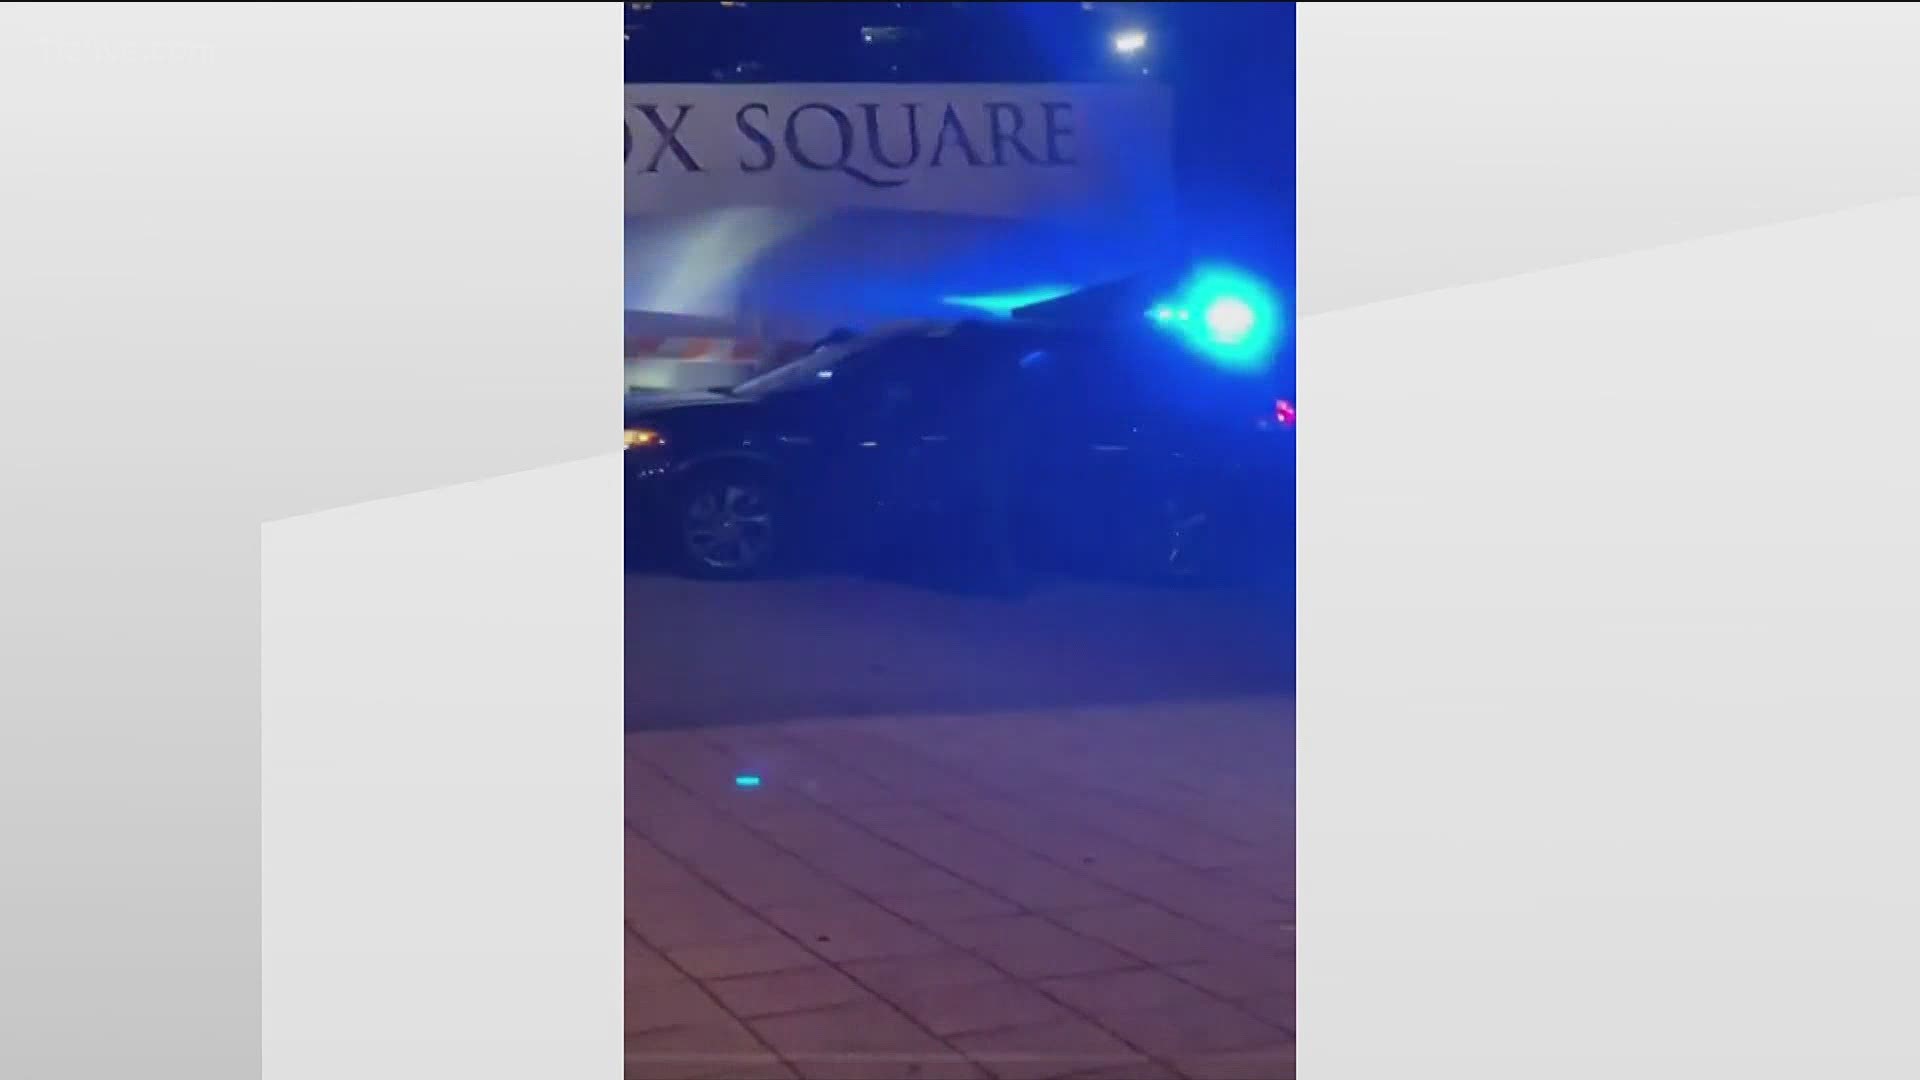 The incident occurred at Lenox Square last year.